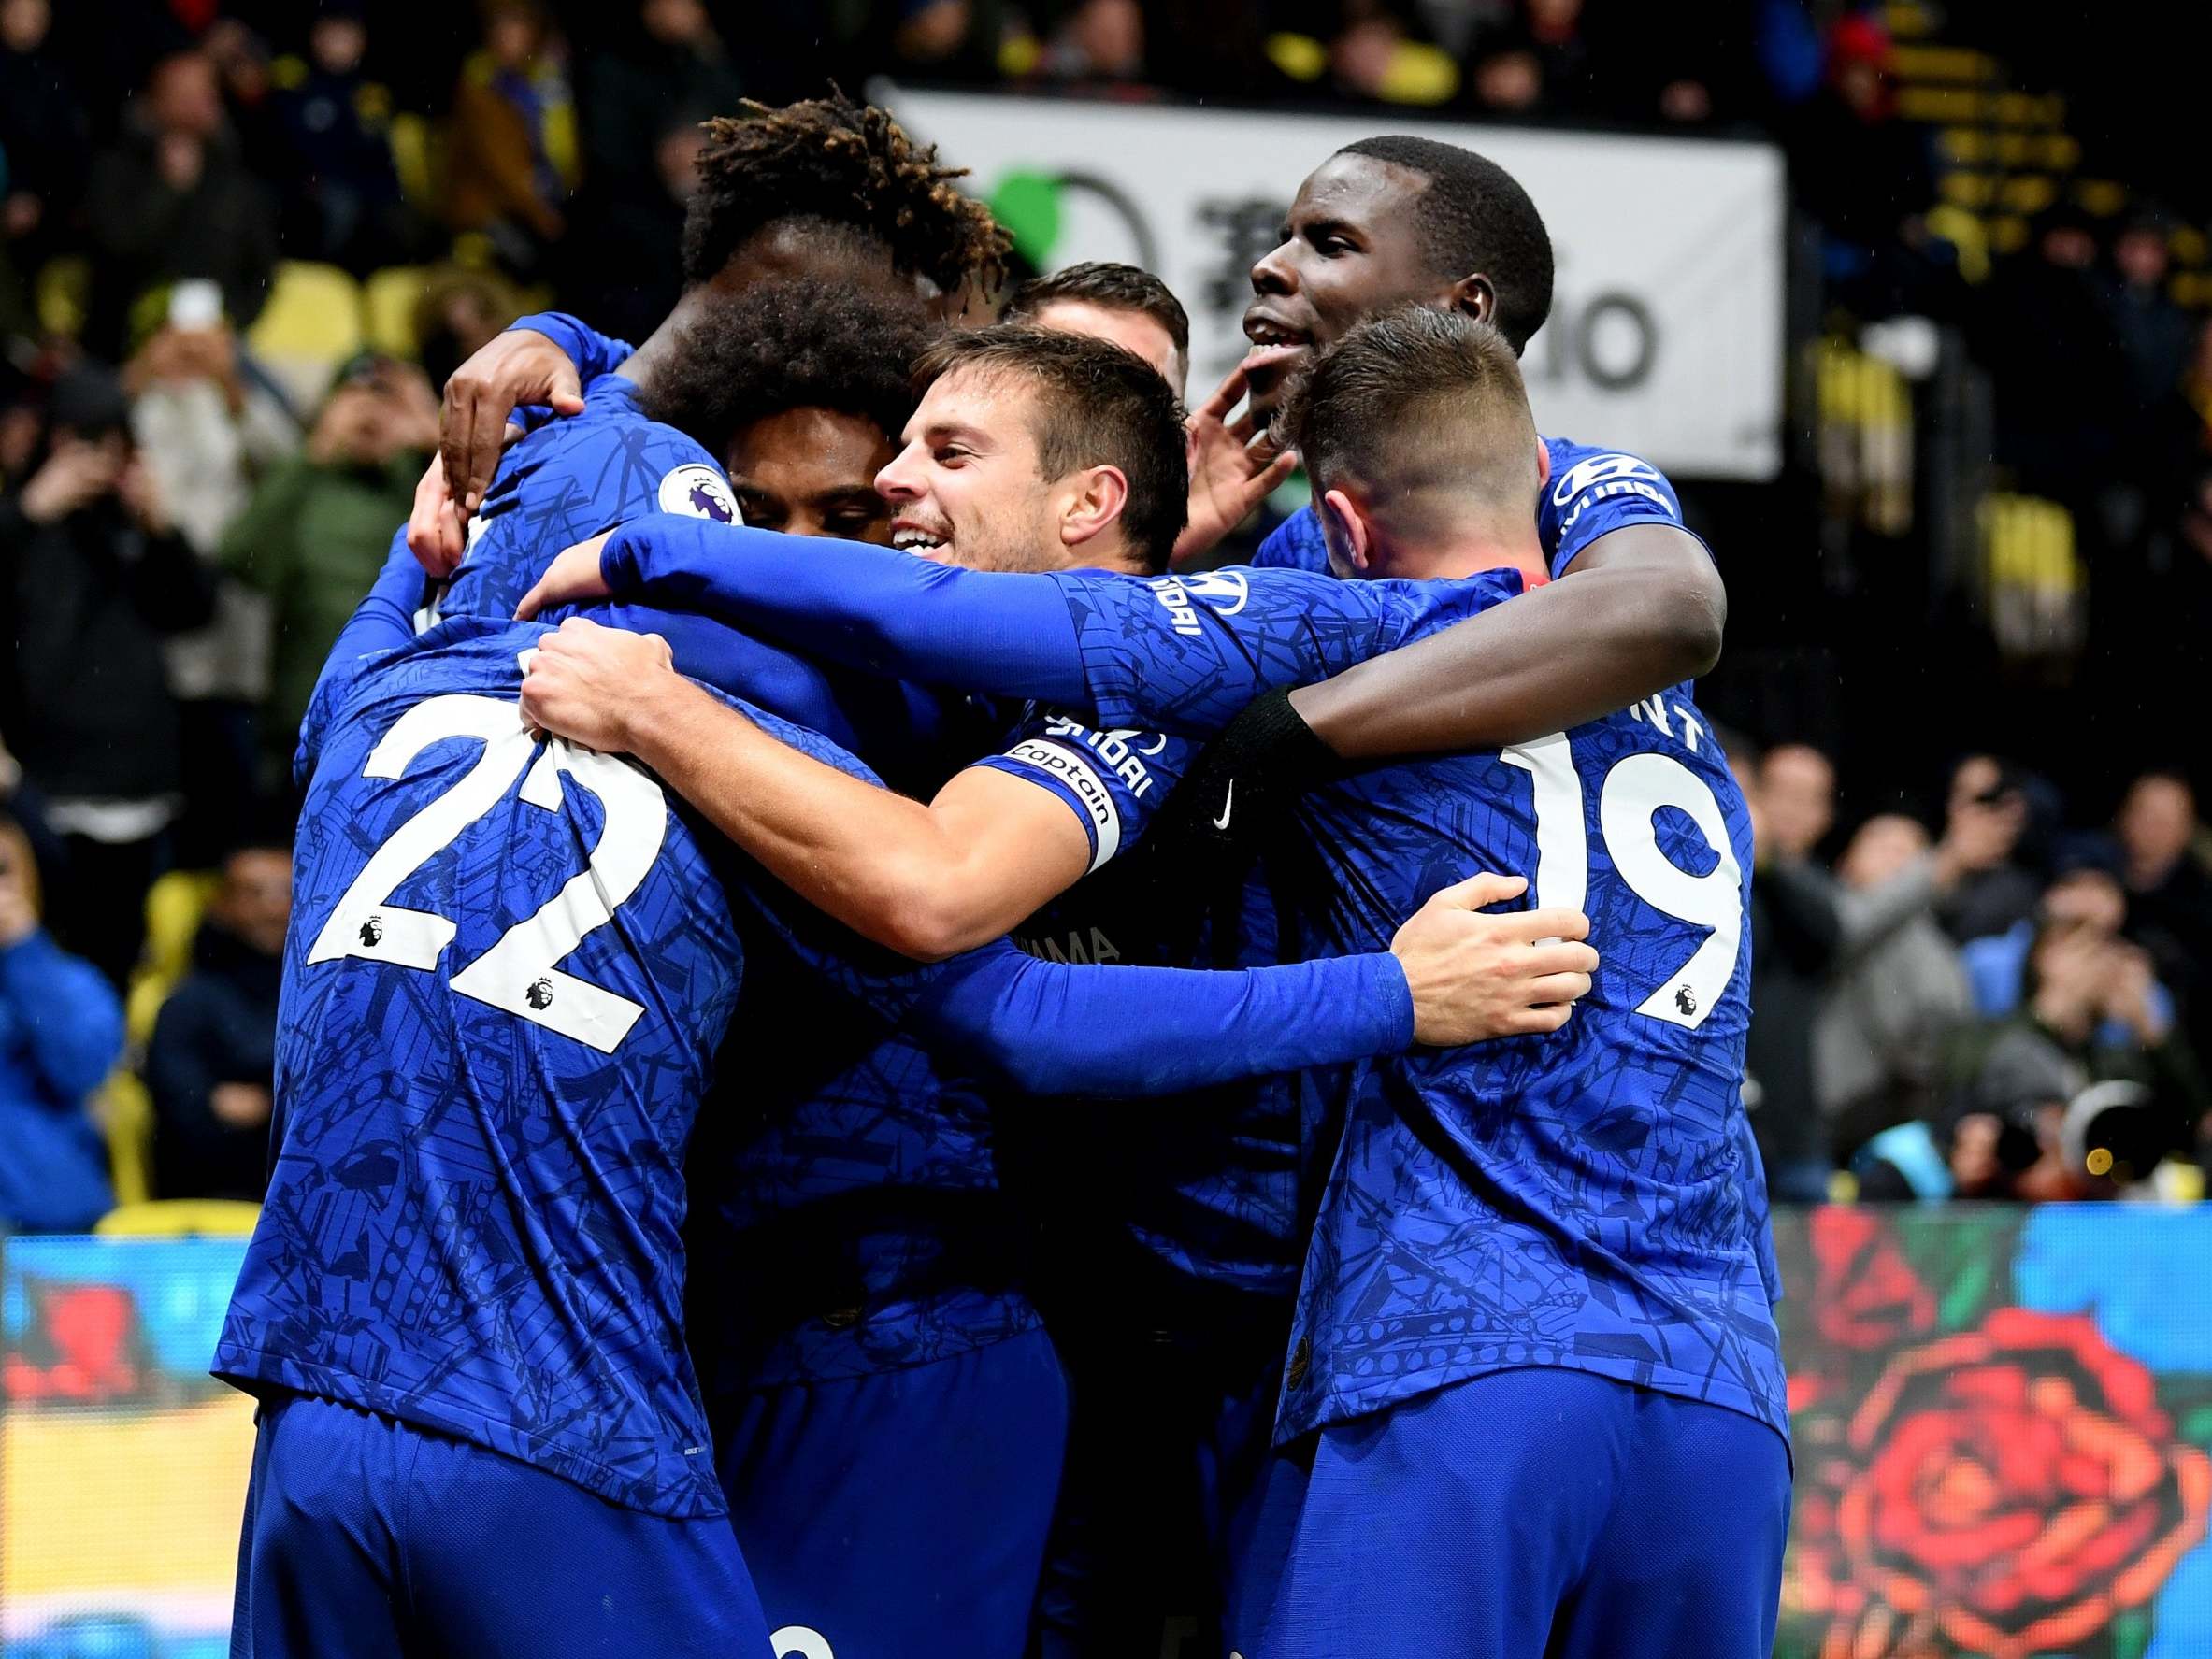 Watford vs Chelsea result: Frank Lampard's side survive nervy finale to keep Hornets at bay